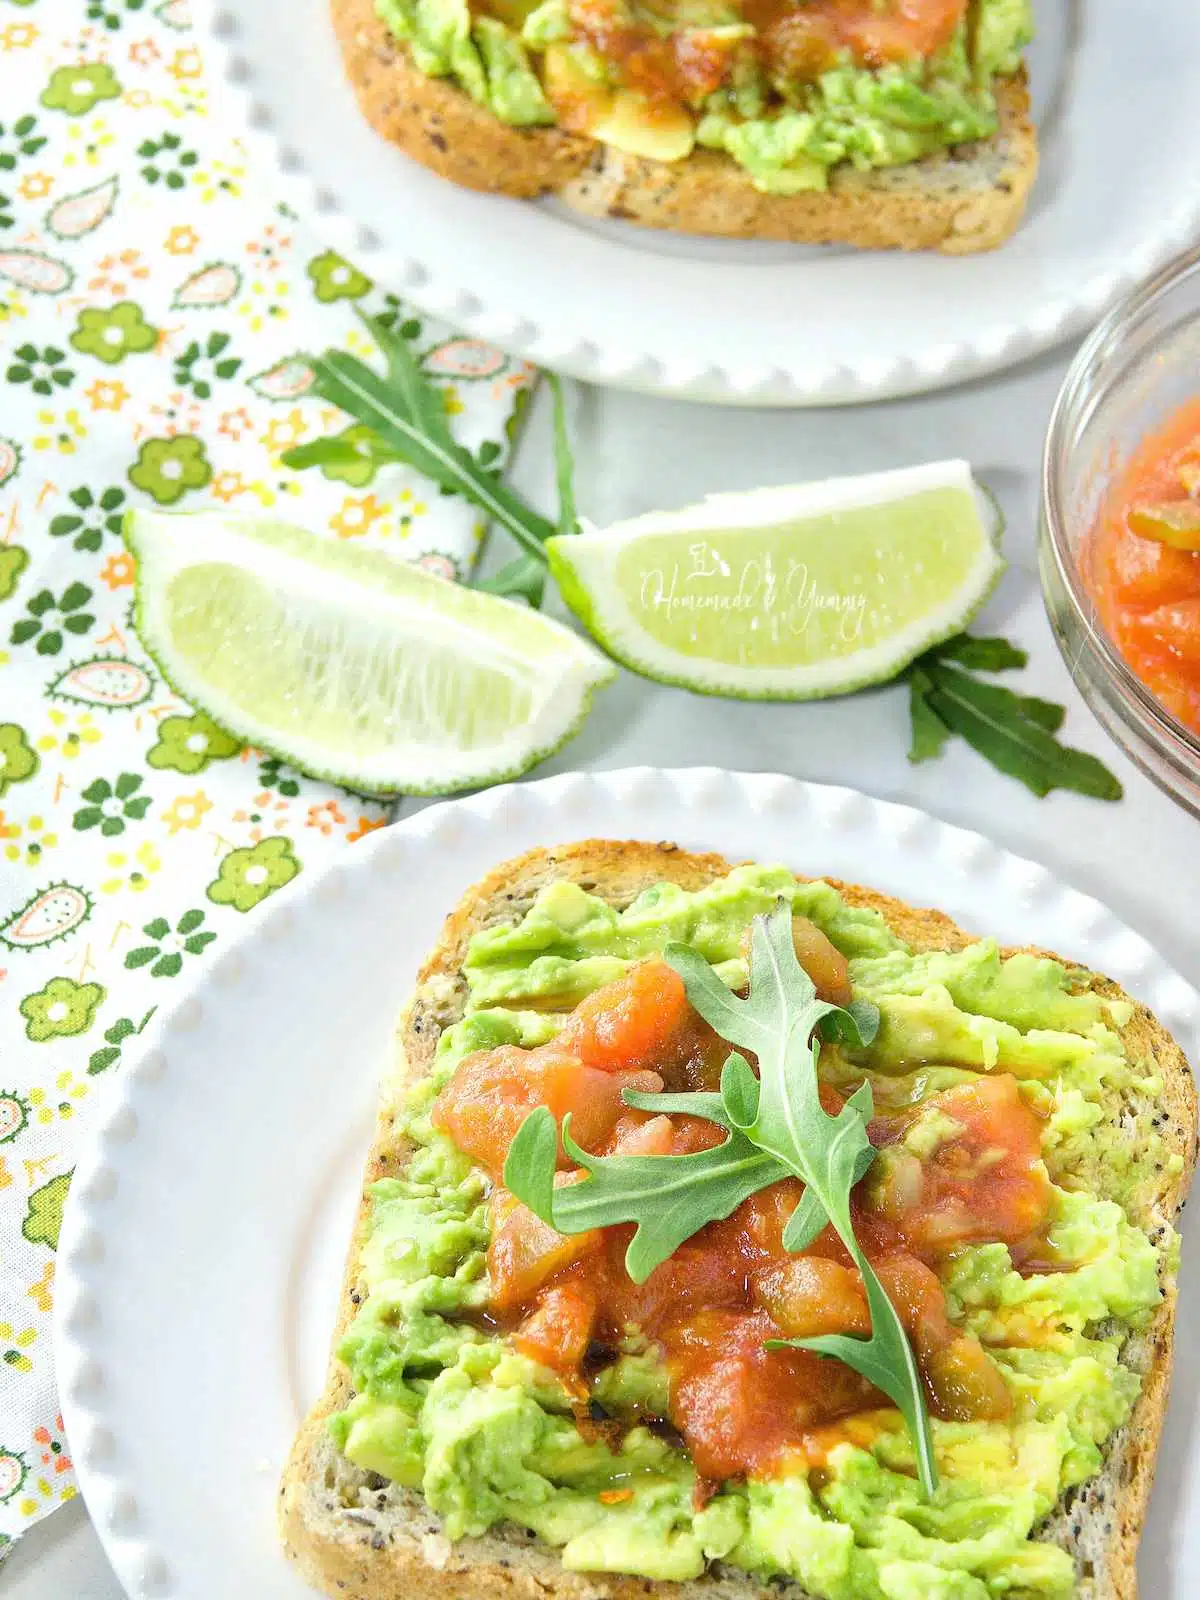 Mashed avocado on toast, topped with salsa and arugula.